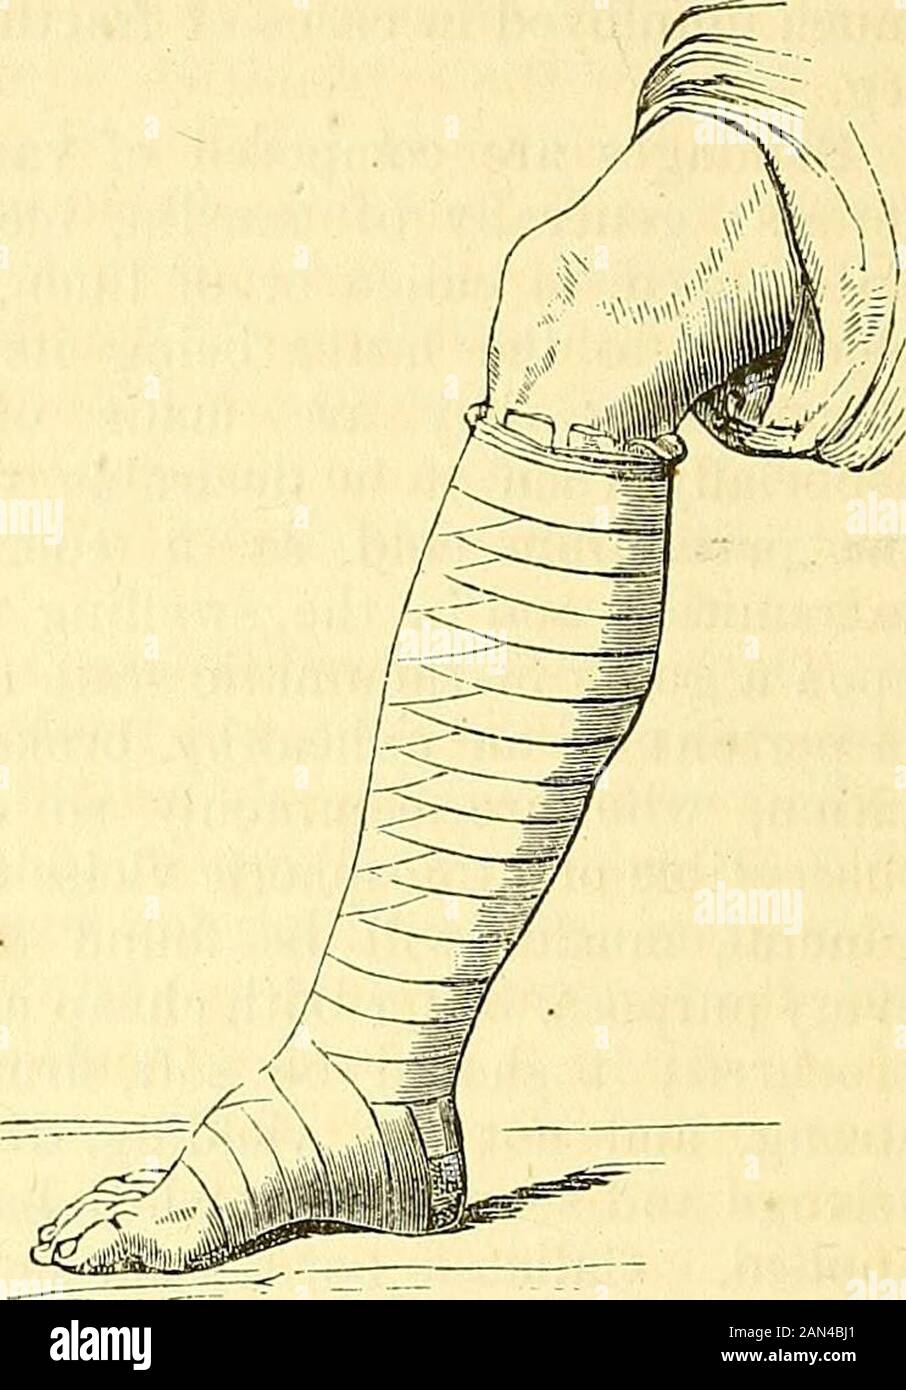 A system of surgery : pathological, diagnostic, therapeutic, and operative . Mode of applying the roller by circular audreversed turns. Appearauce of tlic bandage after it has beeaapplied. The evil eifects of unequal compression by the bandage are well illustrated infig. 158, copied from John Bell; it also shows how important it is always tobegin the application of the bandage at the distal extremity of a limb, and notabove the wrist or ankle, as happened in the case so graphically described by thecelebrated Scotch surgeon. In all cases of severe injury or disease, with a tend-ency to swelling Stock Photo